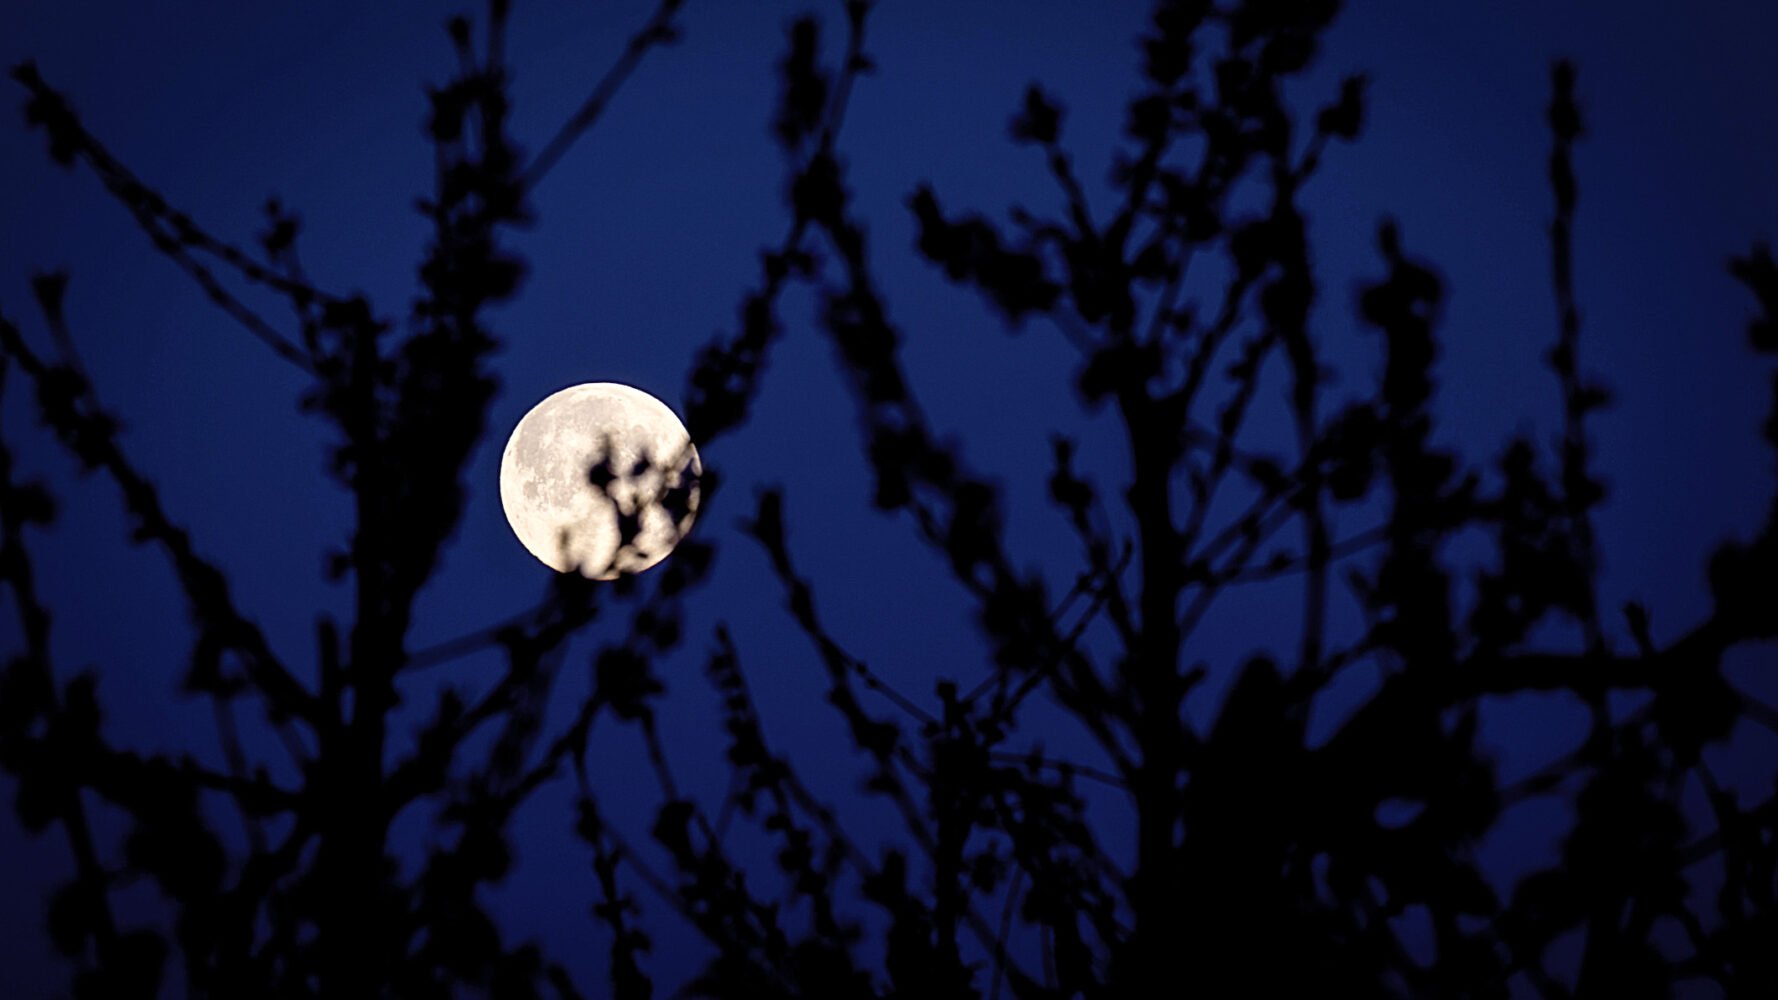 a full moon lights up an ink blue night sky, with the silhouette of branches in the foreground